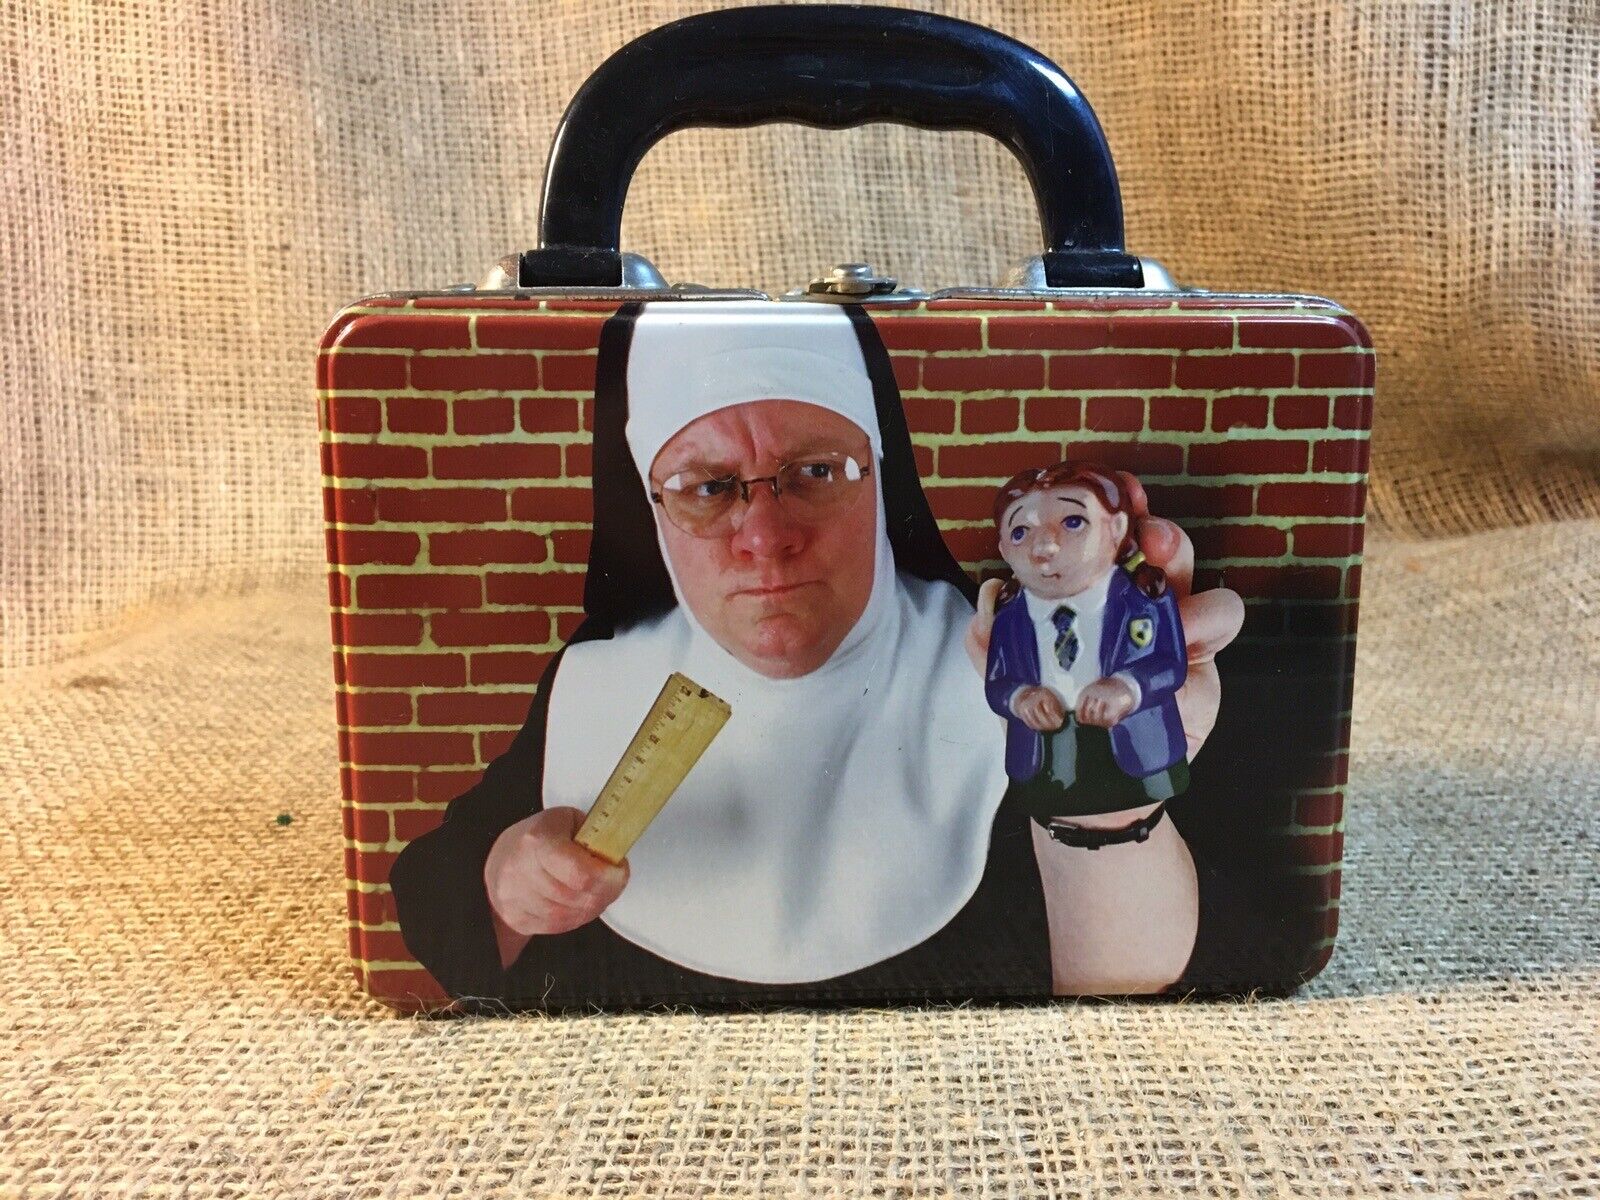 VTG 1998 Accoutrements Sister Strikes Again: Late Nite Catechism Lunch Box Tin